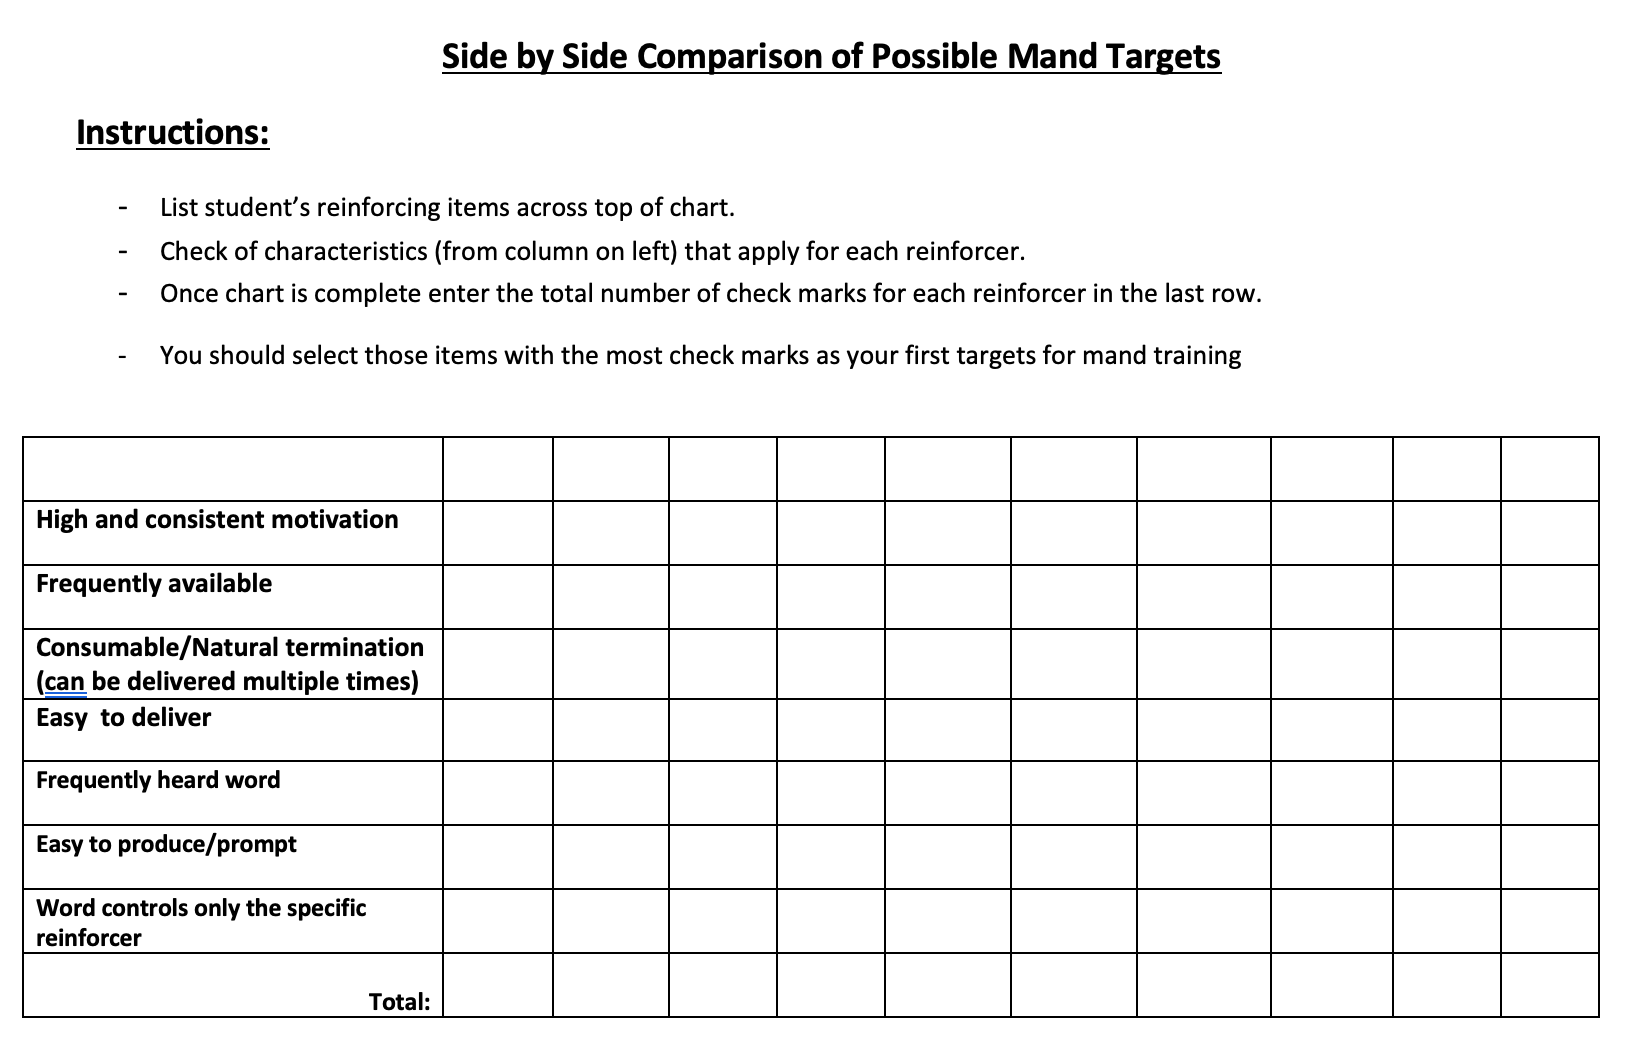 preview image of side by side comparison of possible mand targets.doc for Side by Side Comparison of Possible Mand Targets